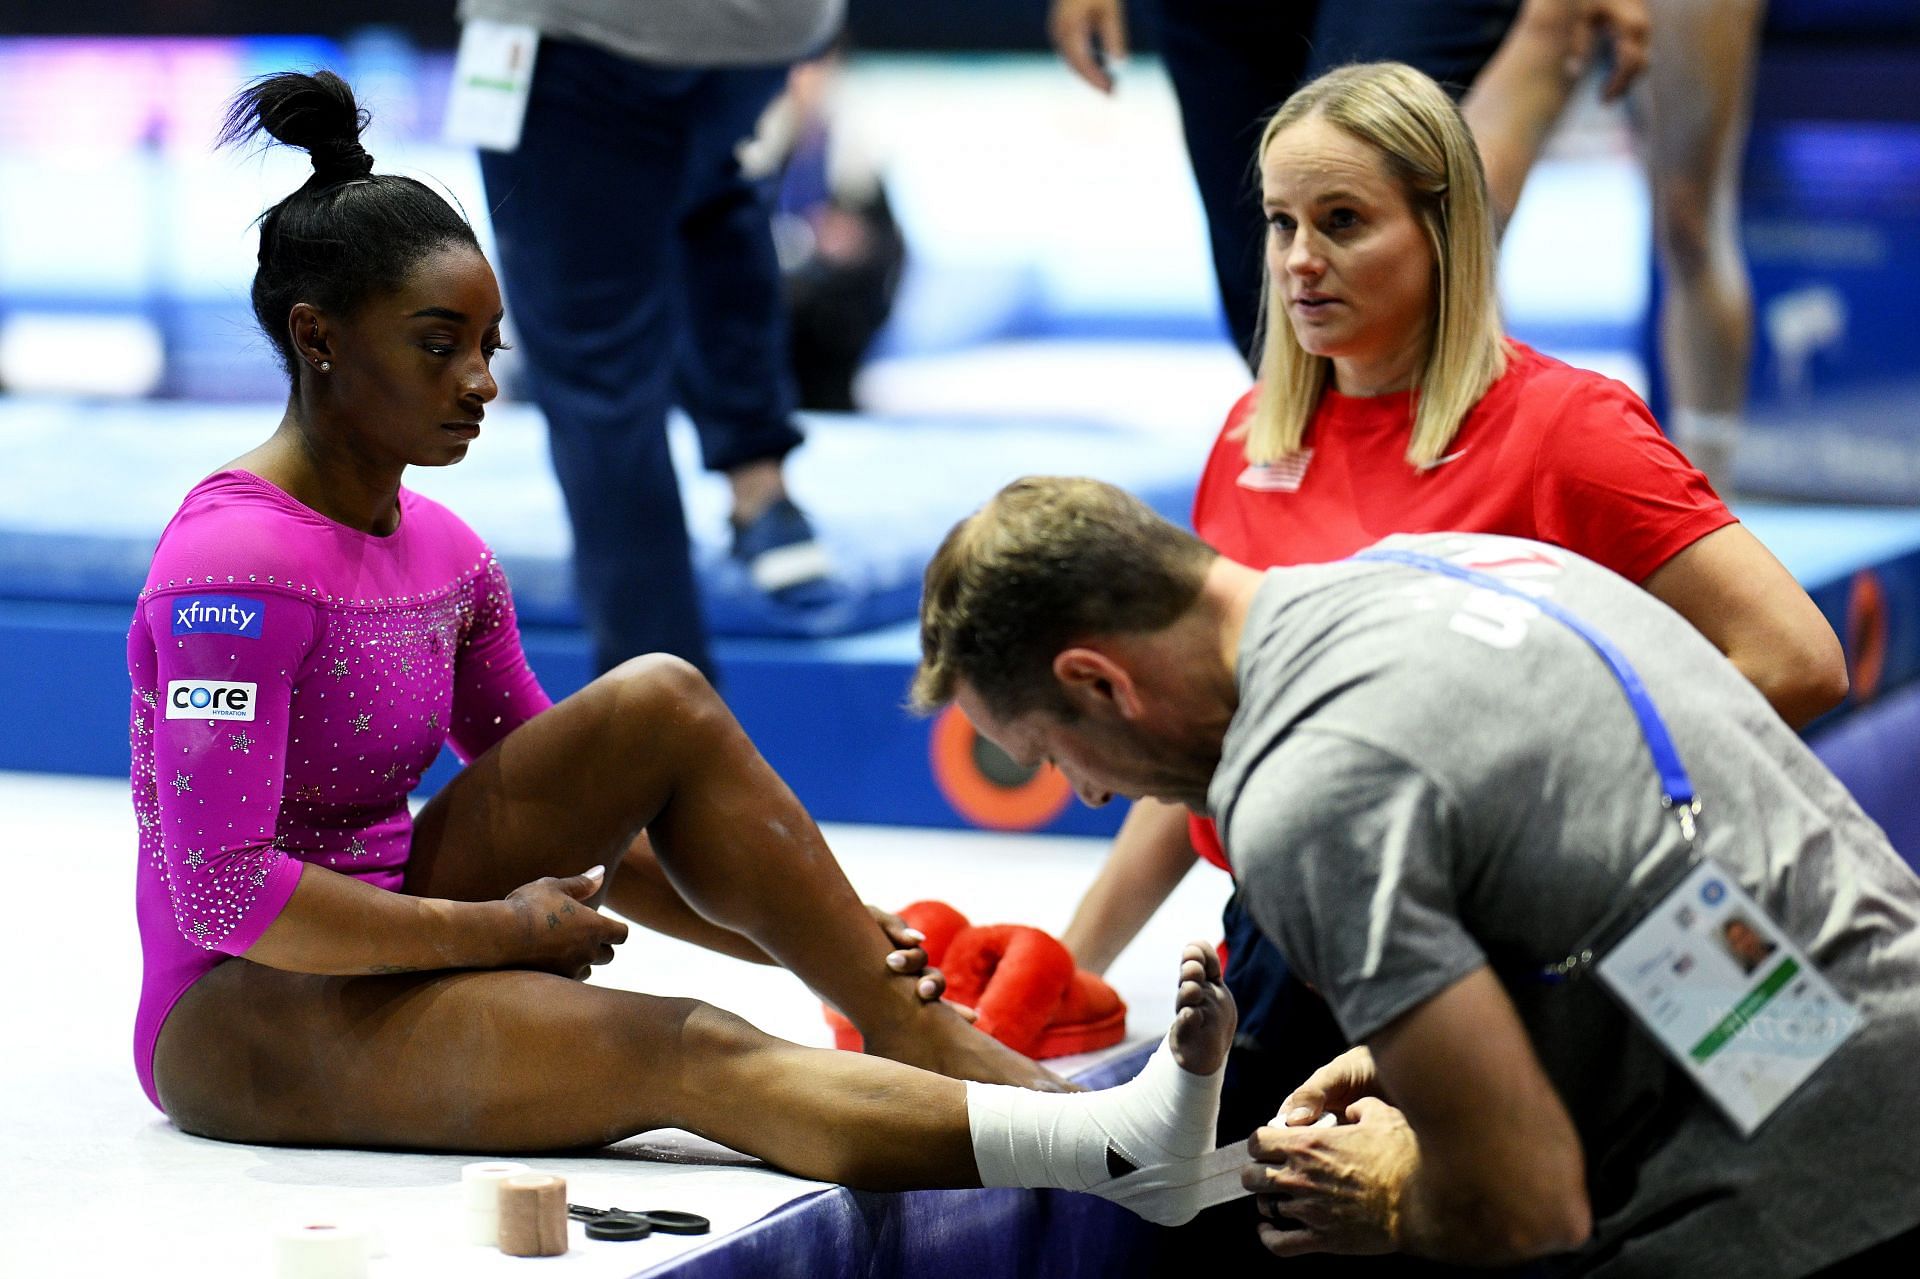 Simone Biles along with her coaches Landi Laurent and Cecile Landi during the podium training at the 2023 FIG Artistic Gymnastics World Championships in Antwerp, Belgium